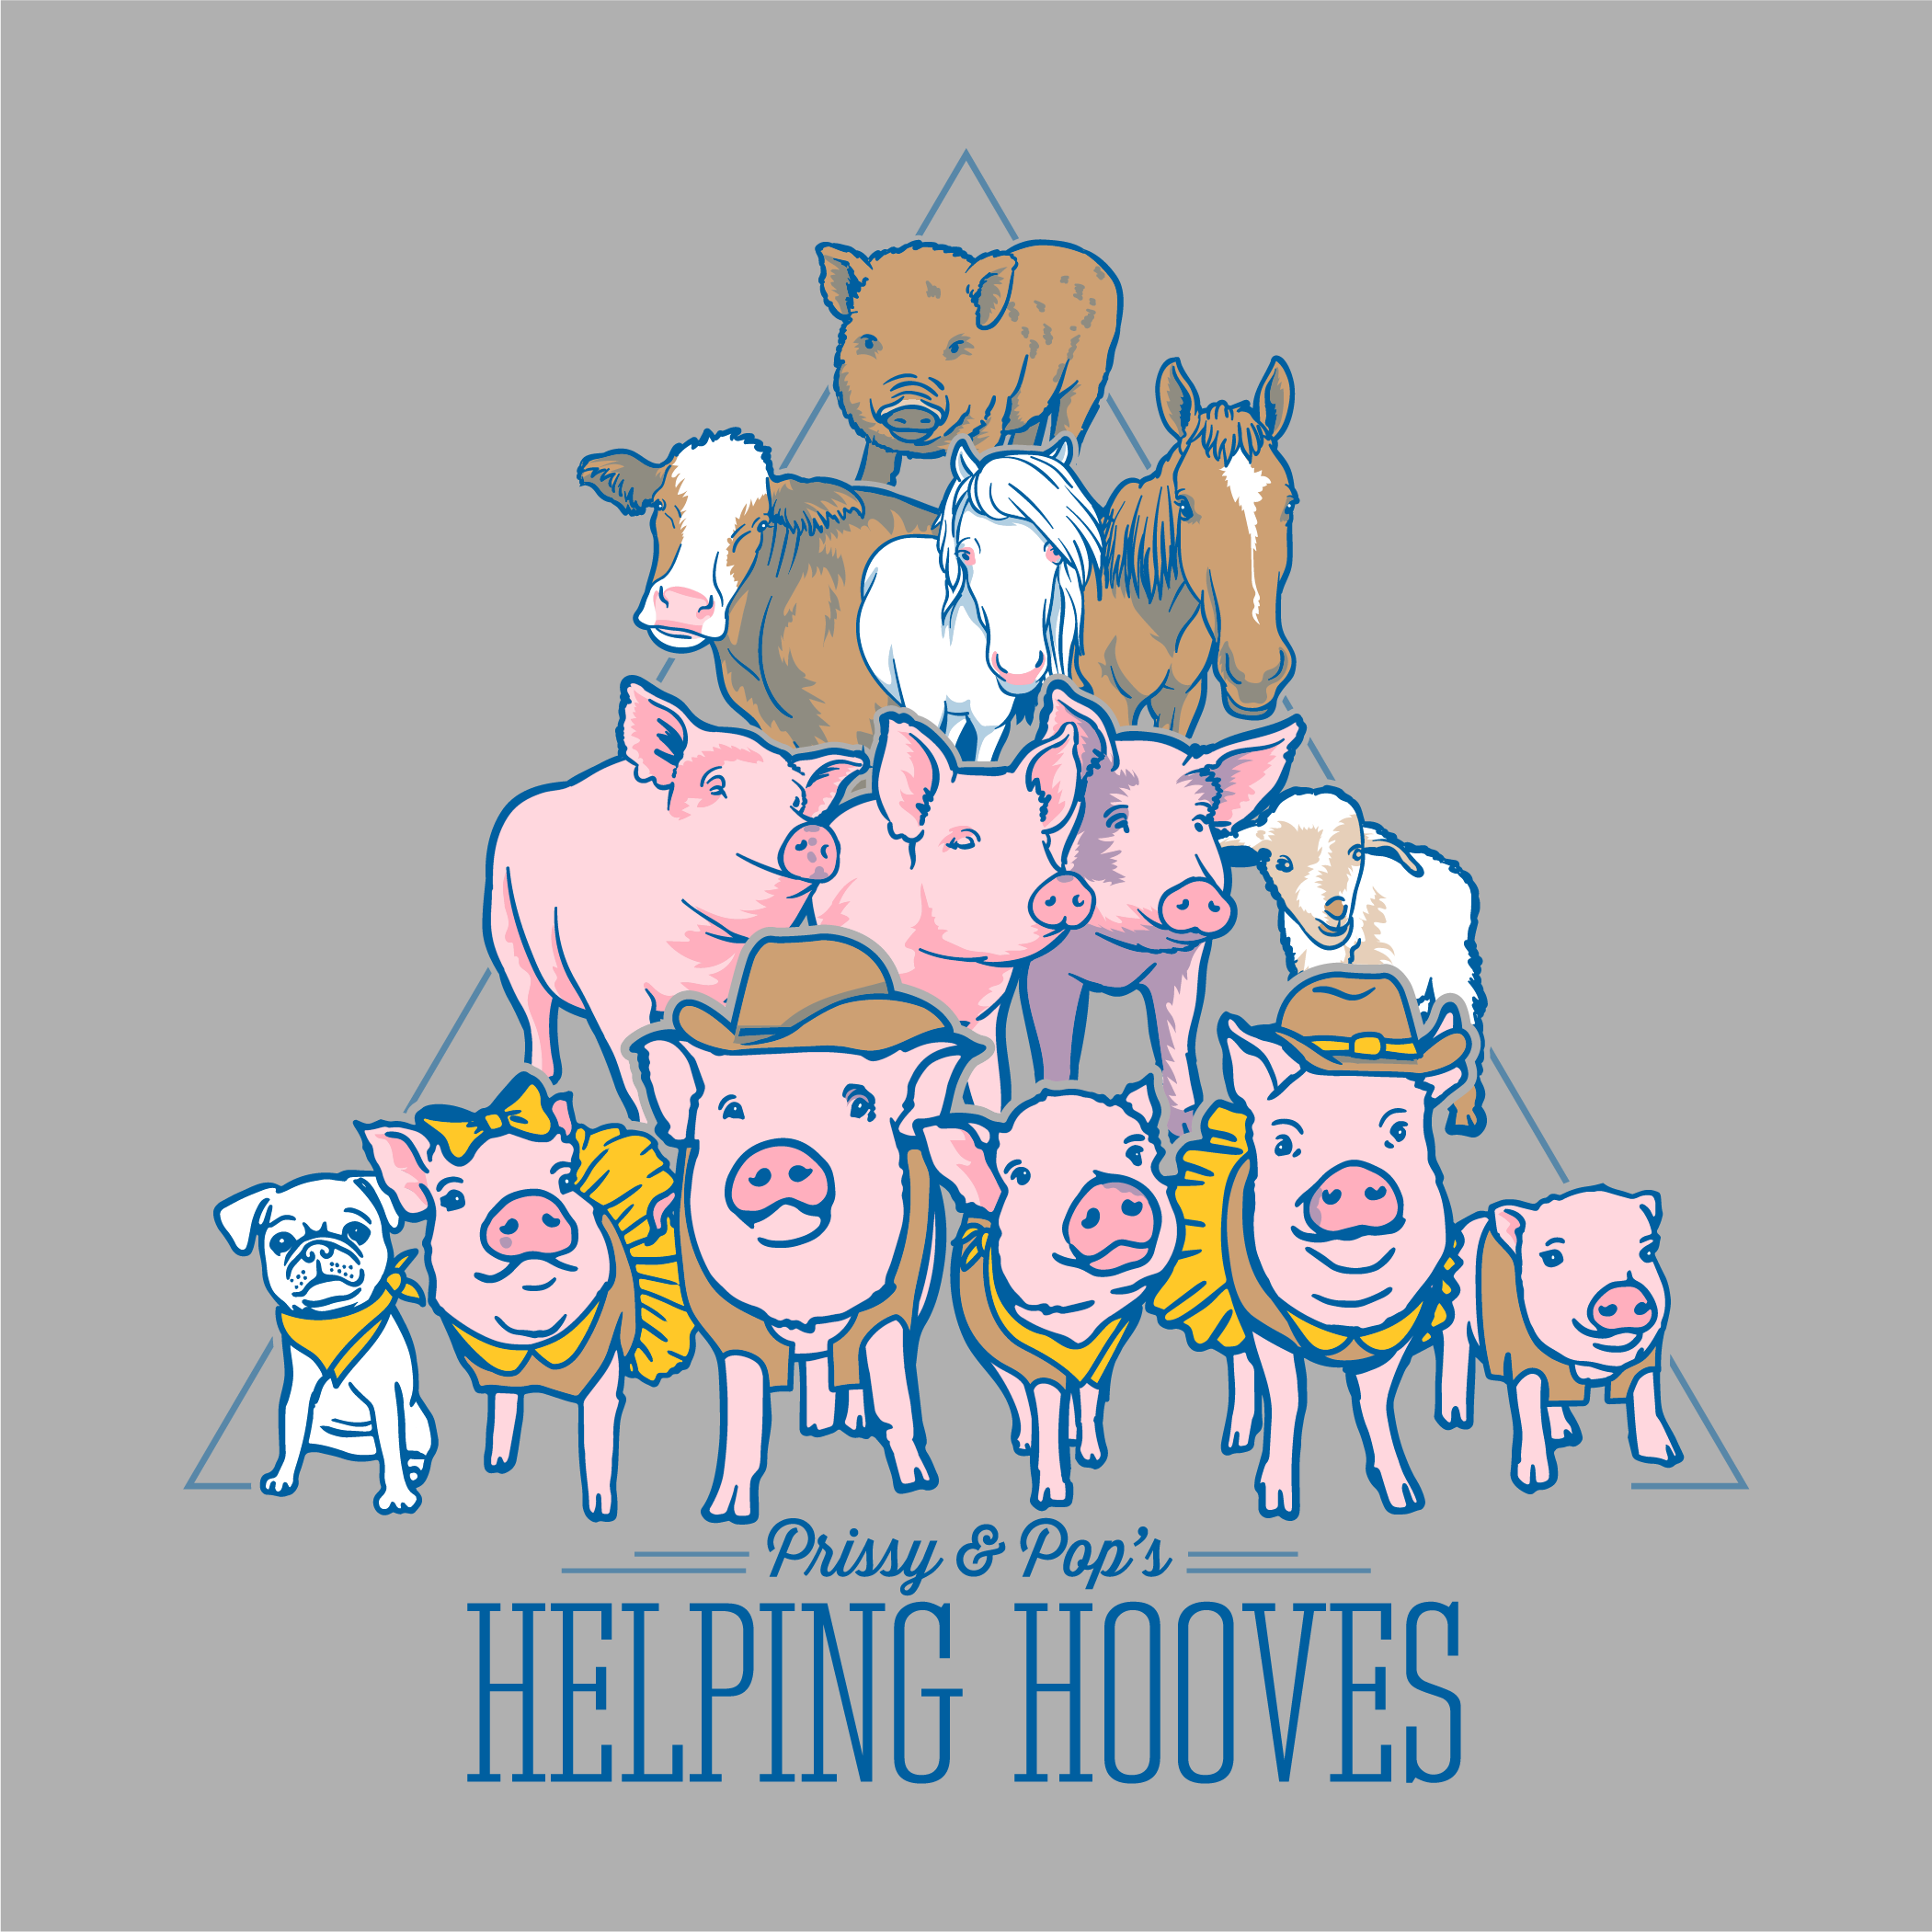 Prissy & Pop’s Helping Hooves shirt design - zoomed